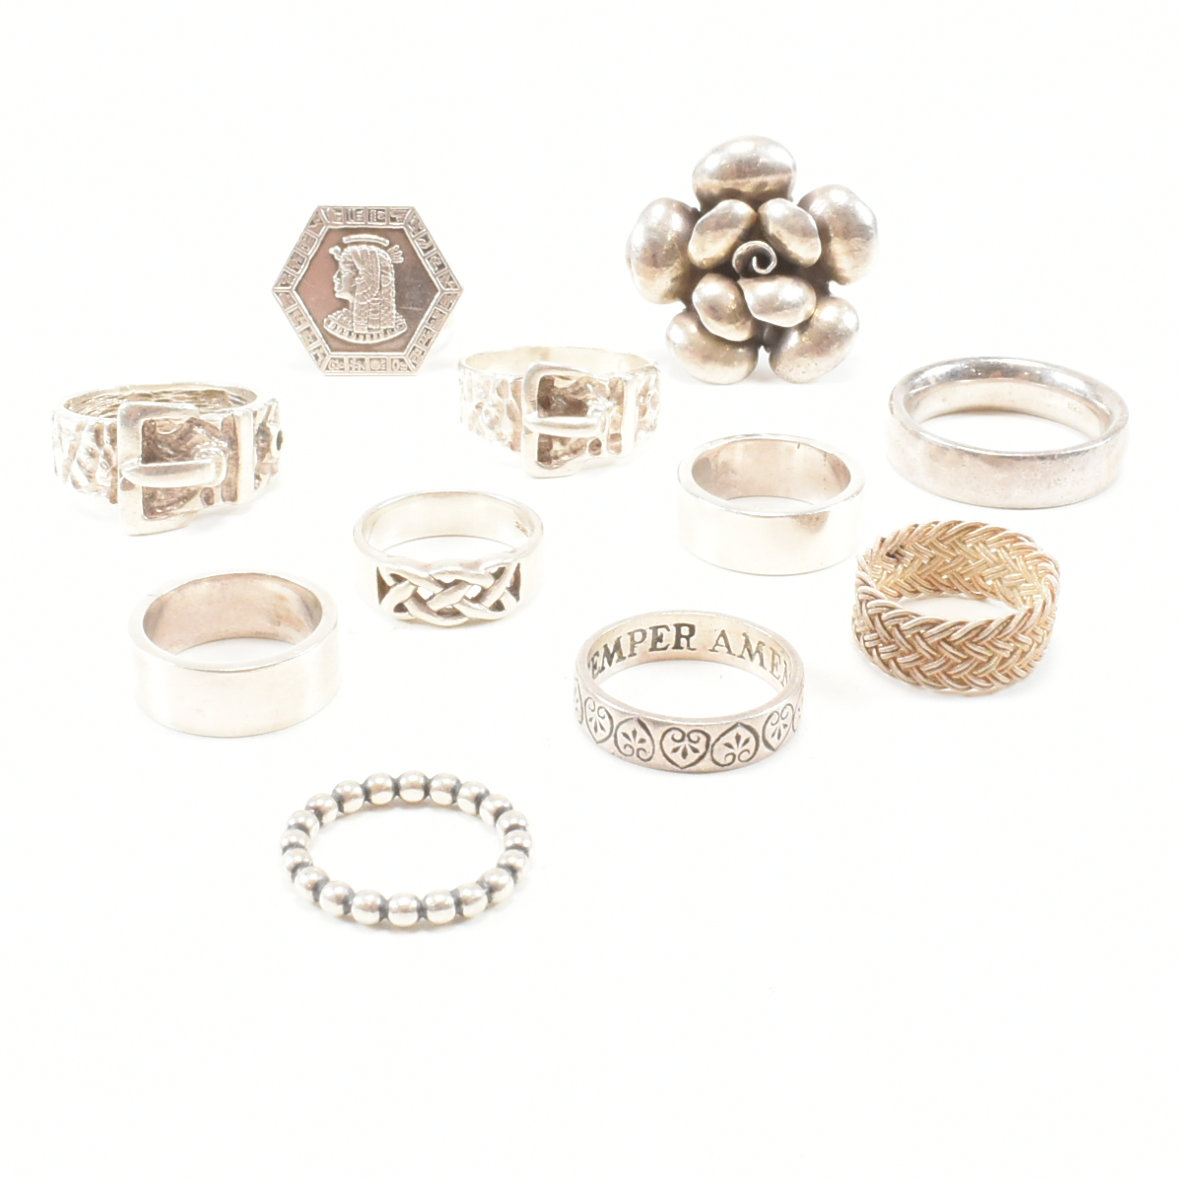 COLLECTION OF ASSORTED SILVER & WHITE METAL RINGS